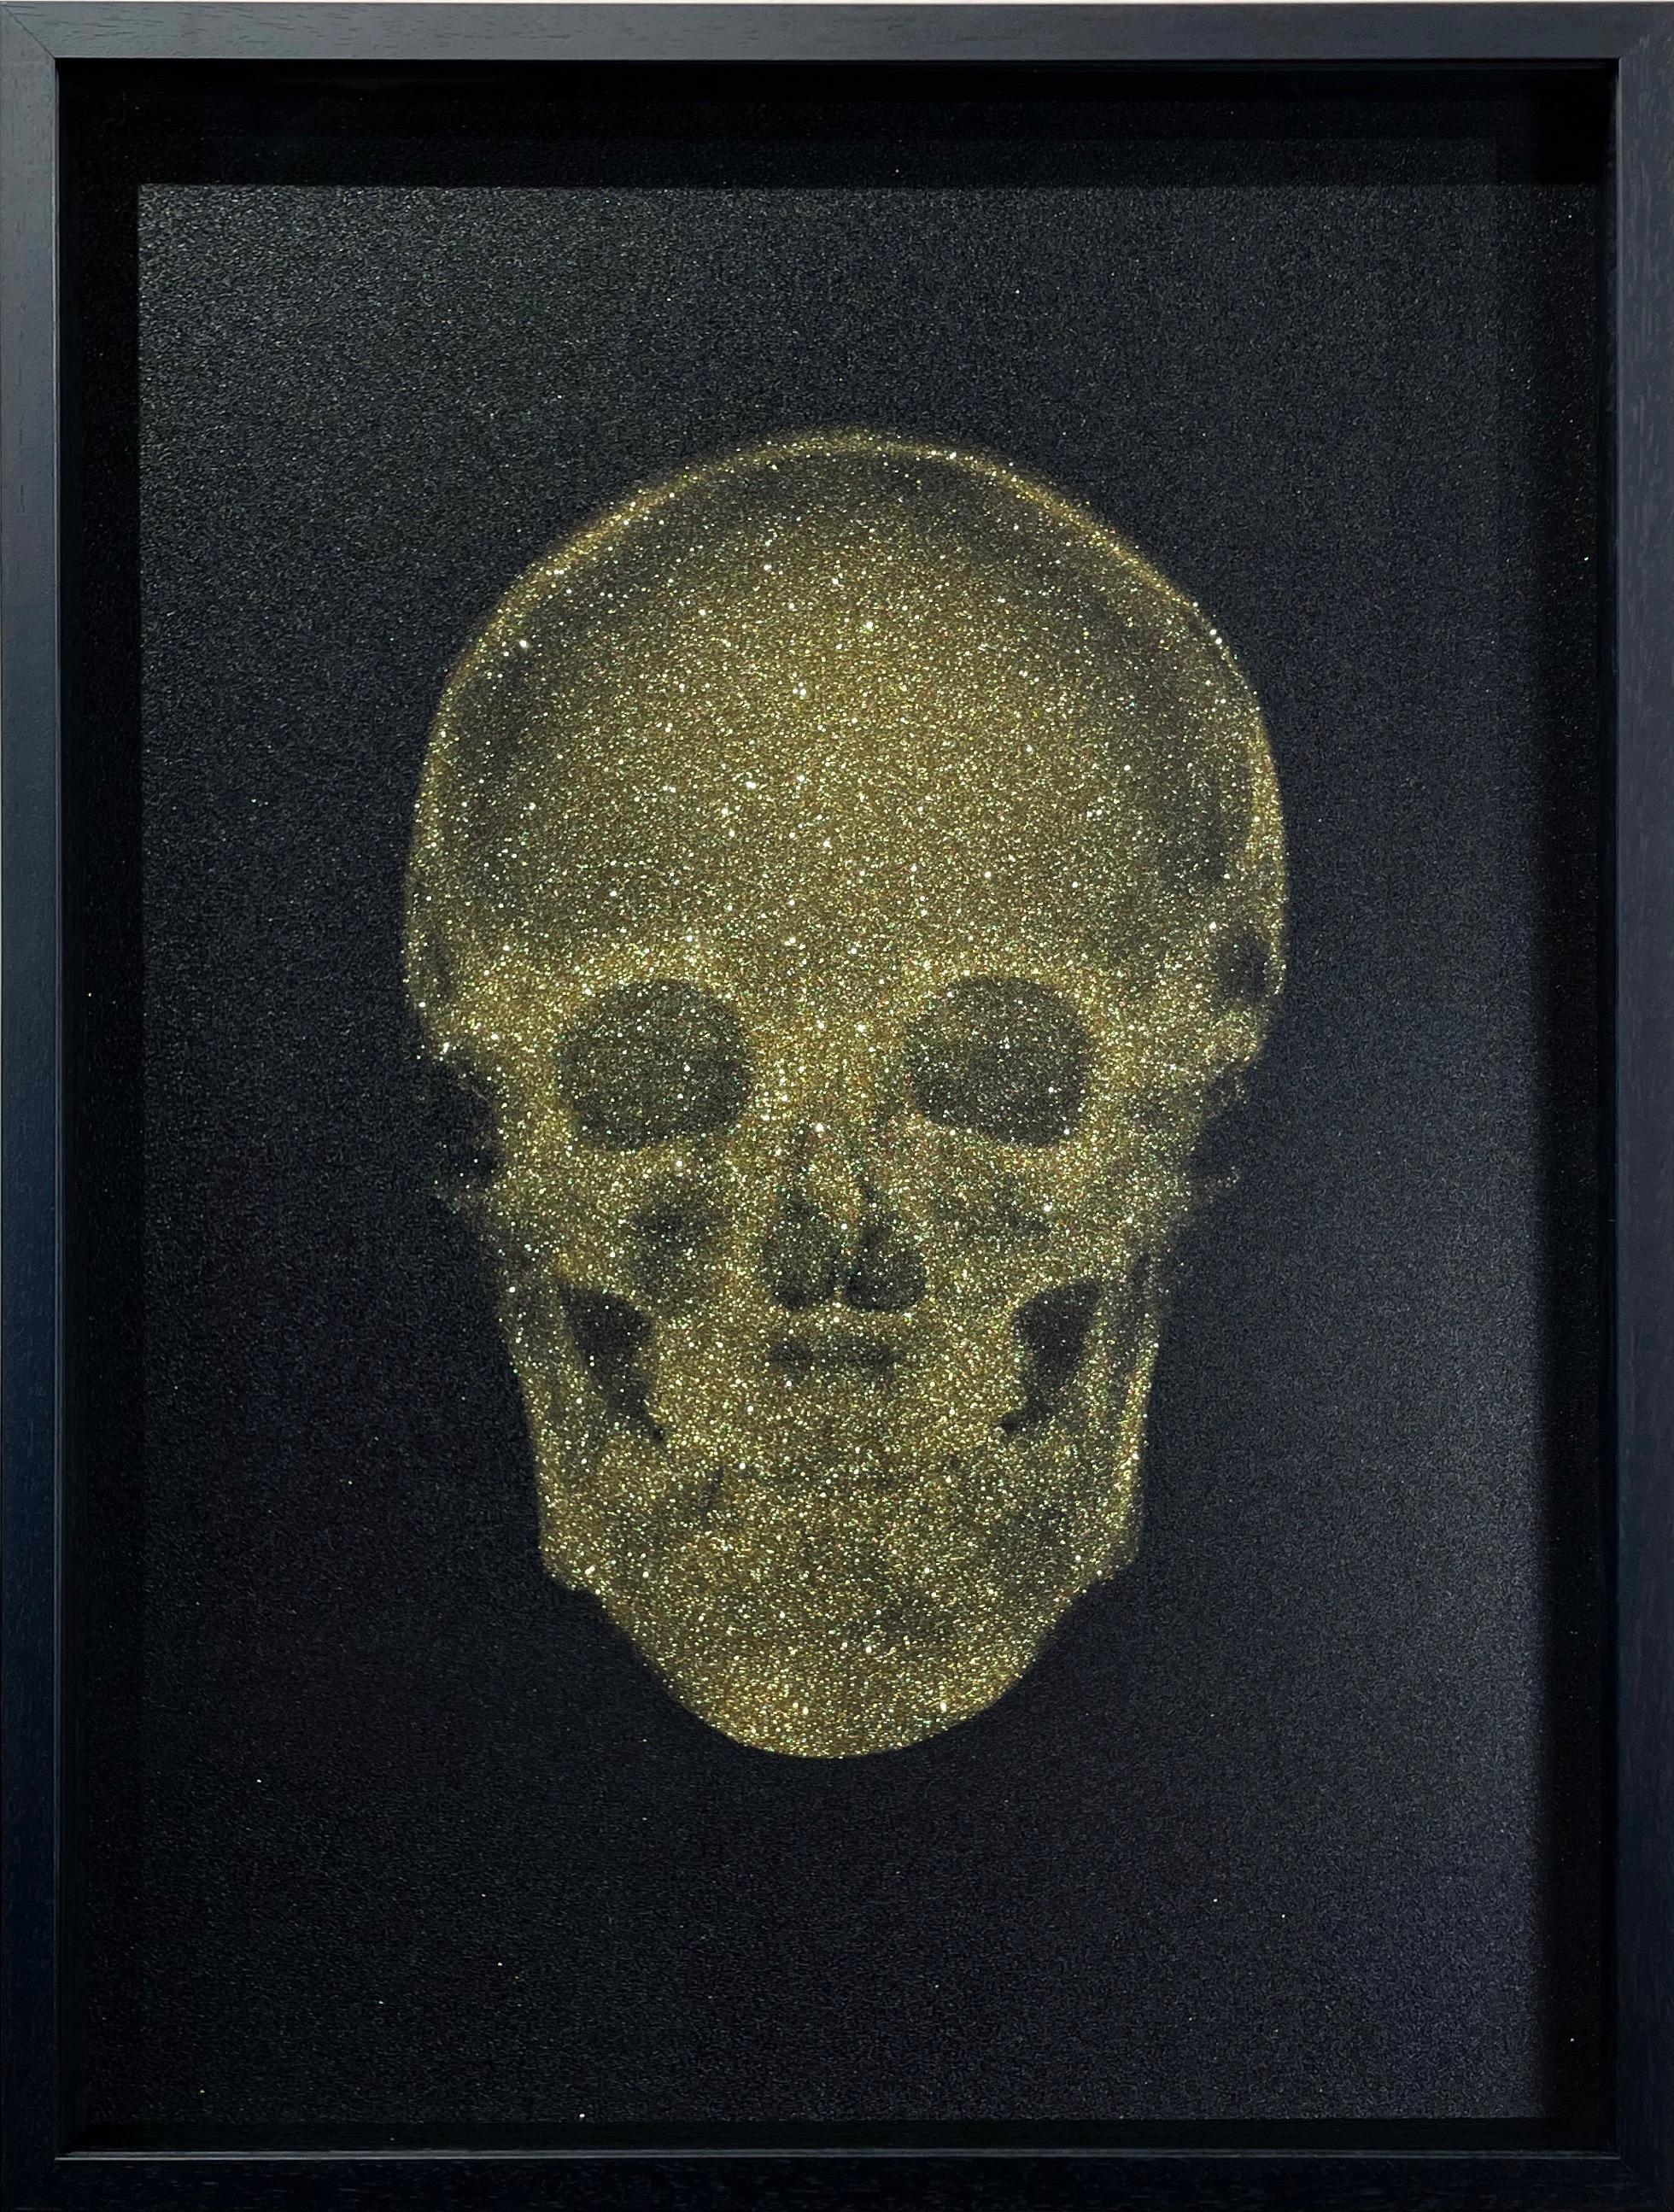 Crystal Skull (Gold on Black) - Photograph by Nick Veasey